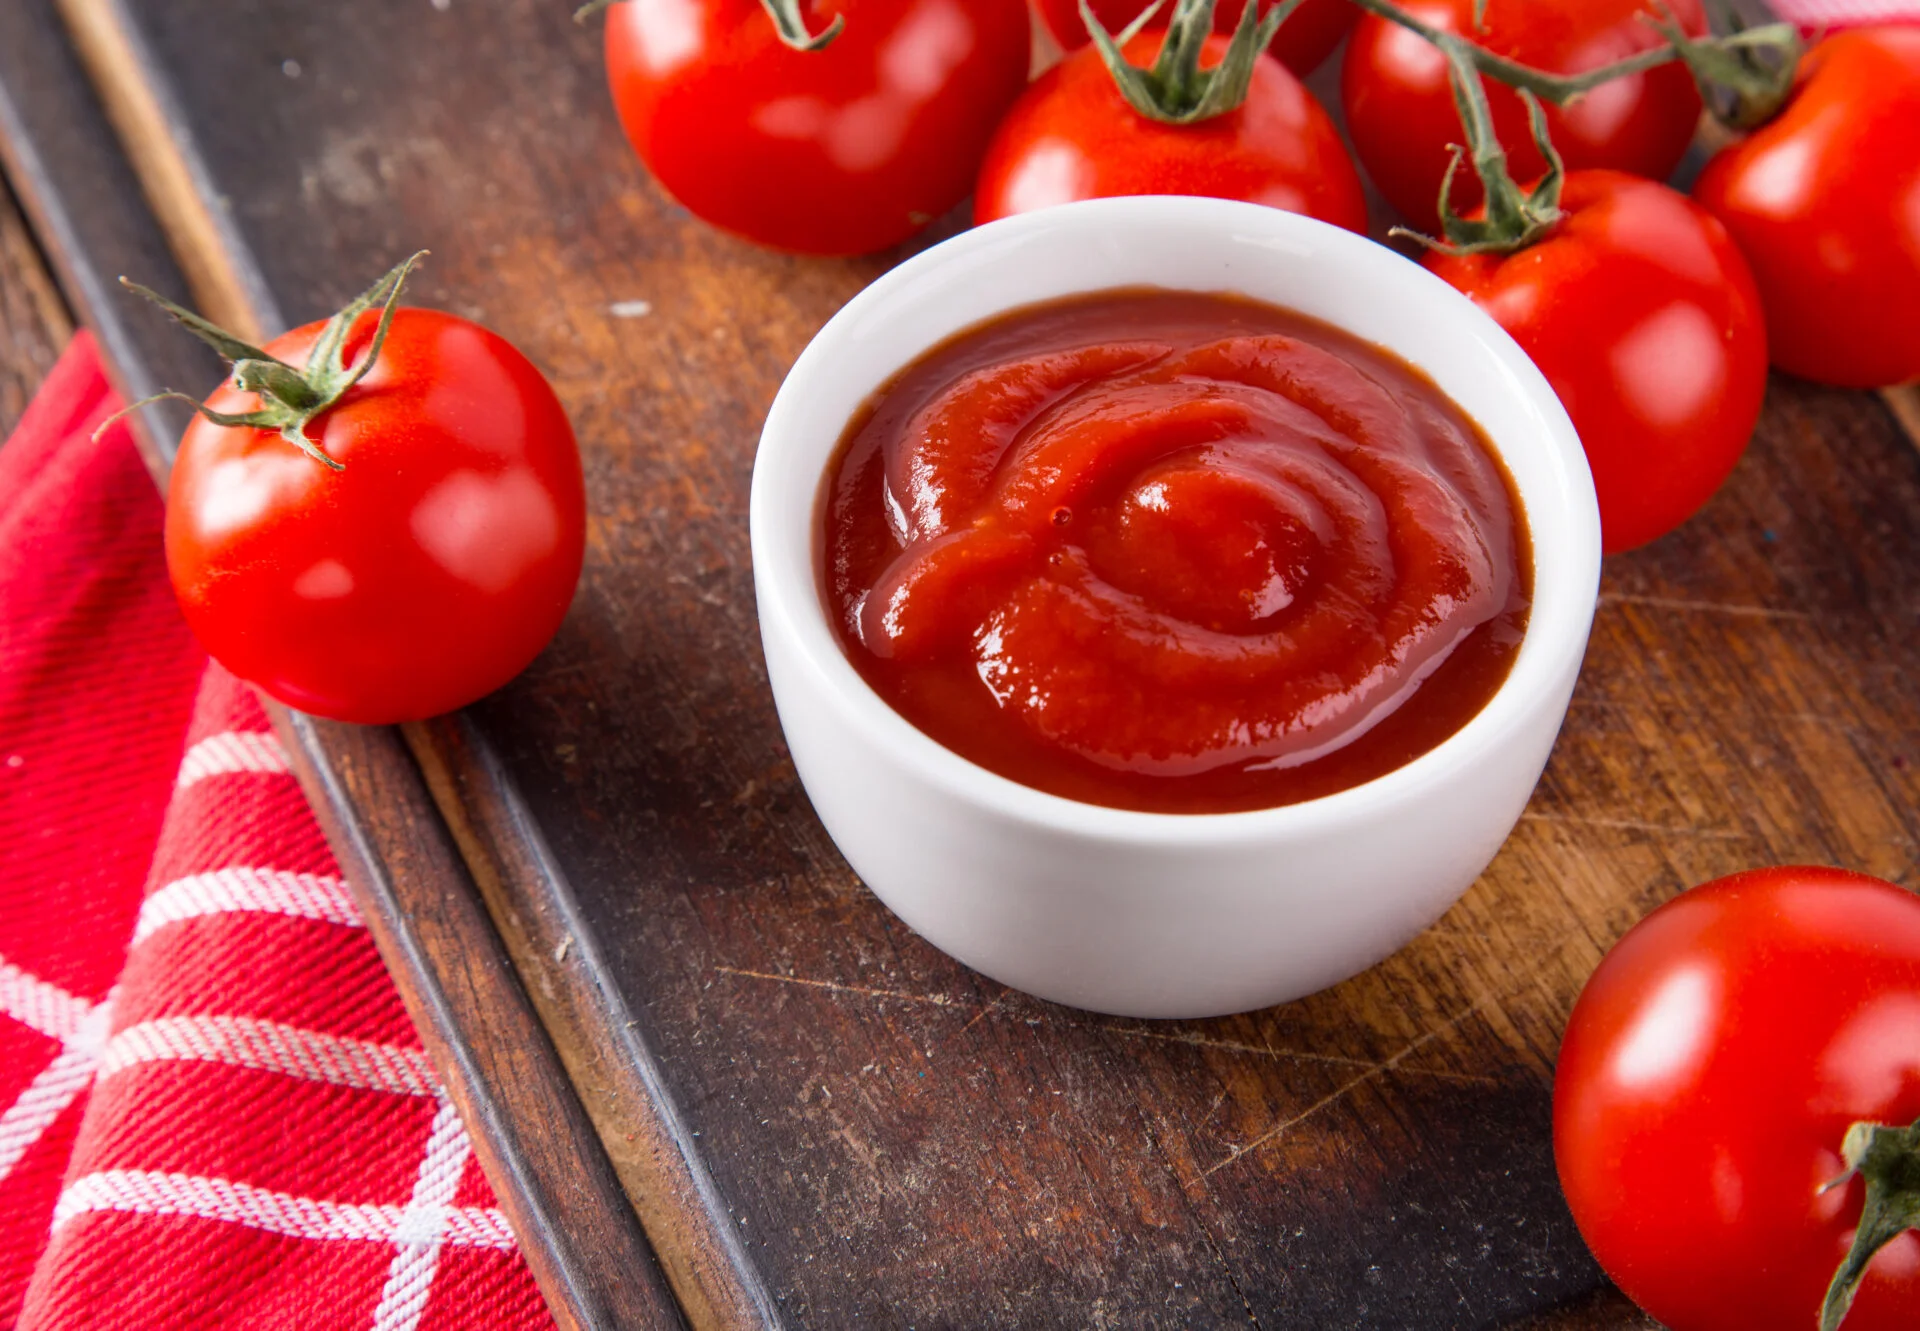 Bowl of tomato sauce and cherry tomatoes on wooden table, close-up.